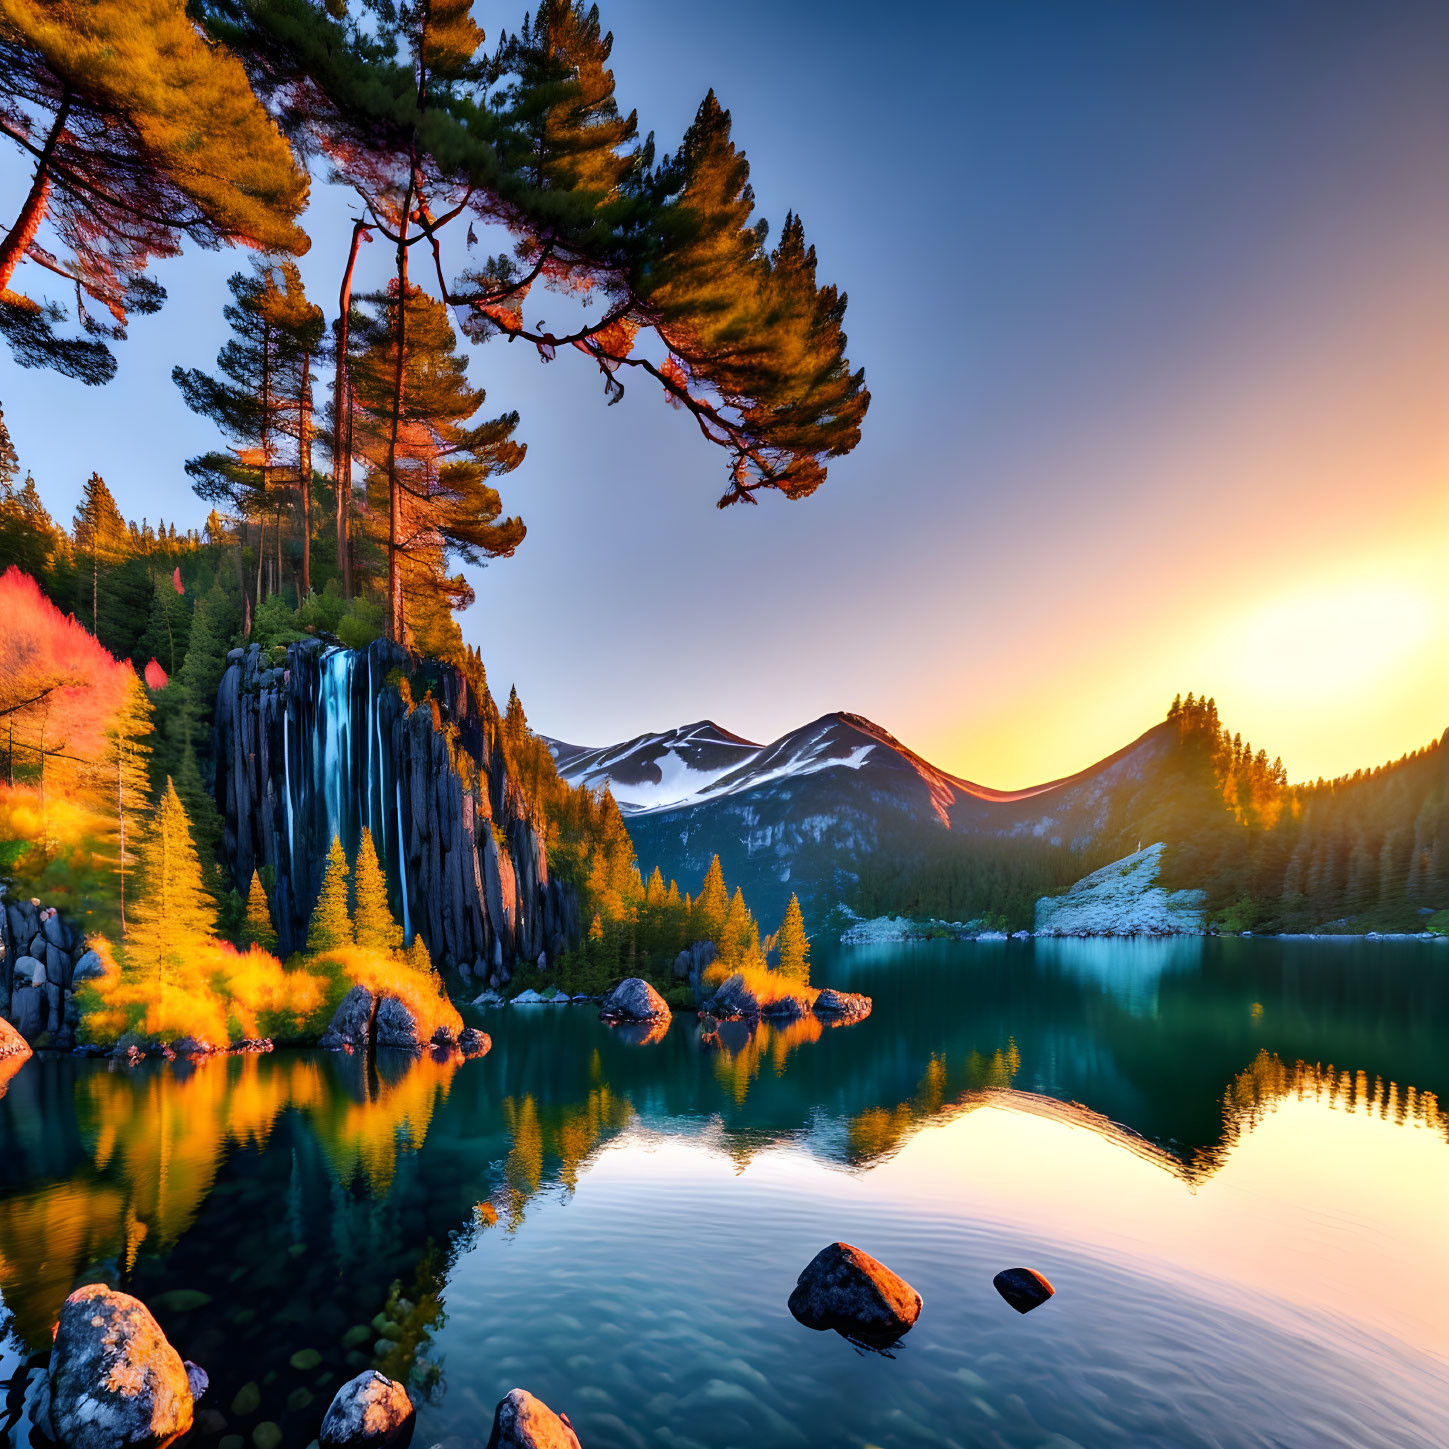 Scenic sunset over tranquil lake with mountains and pine trees